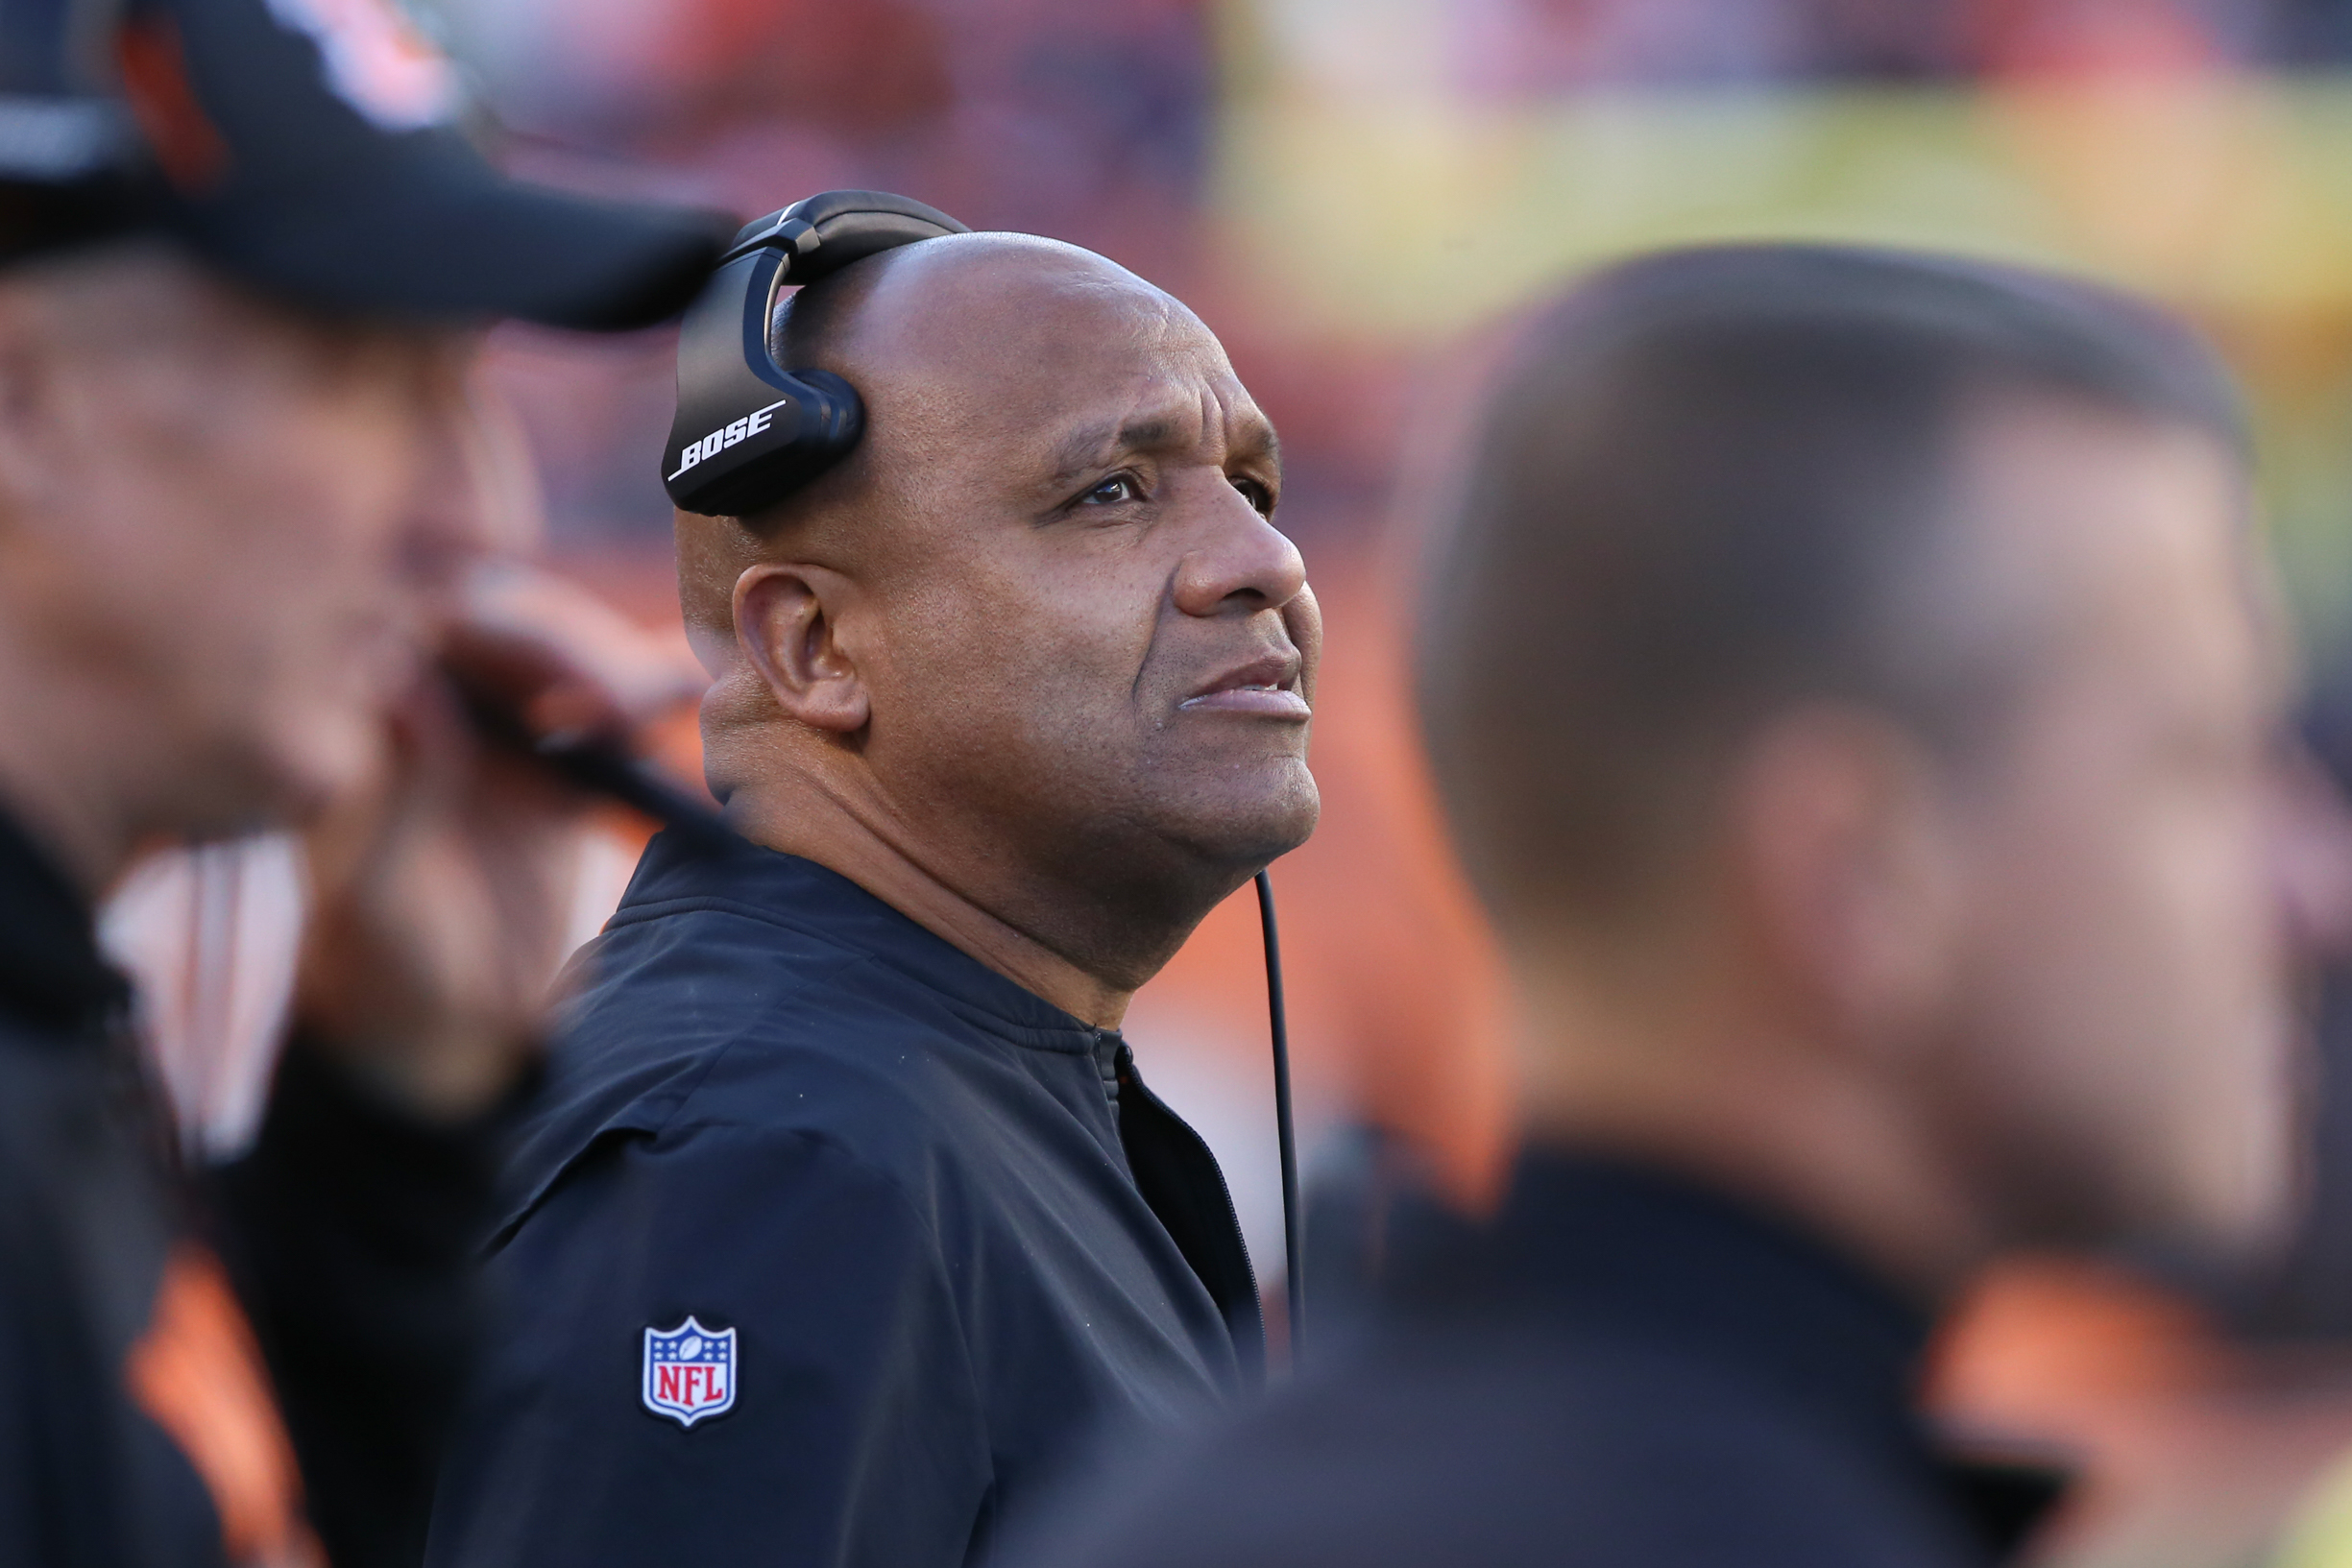 Browns Being Investigated by NFL over Hue Jackson’s Tanking Allegations